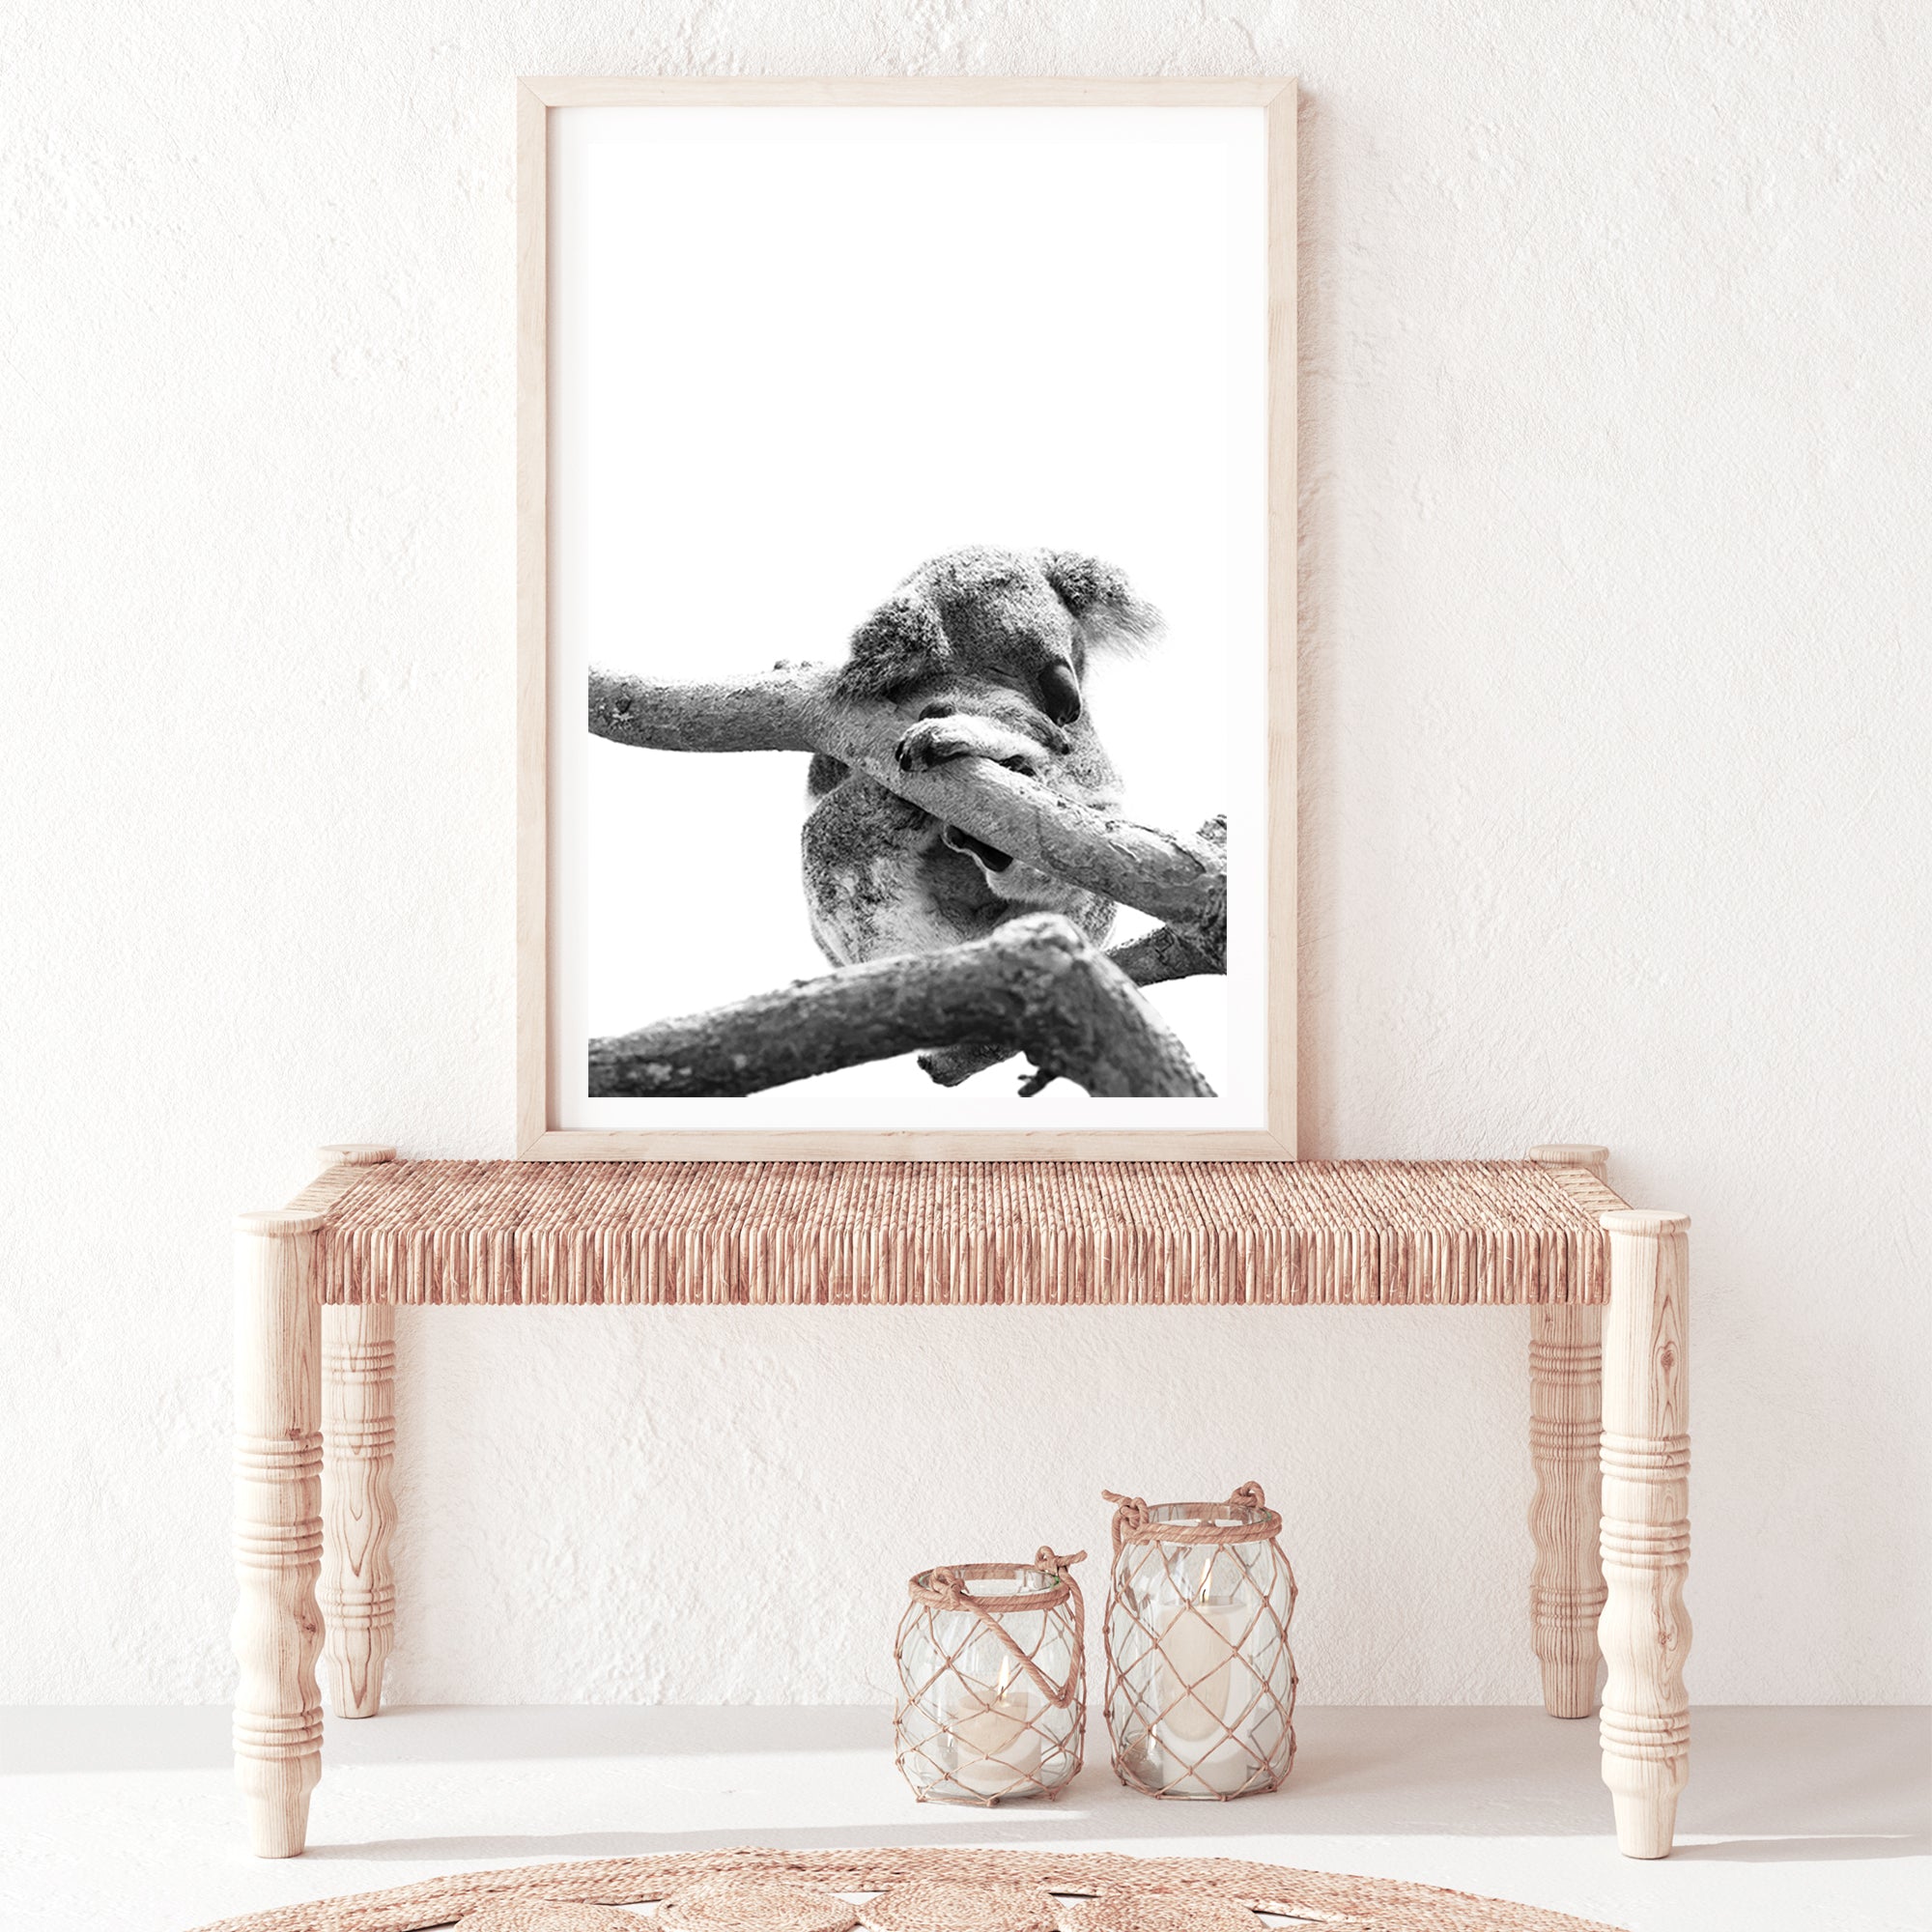 A cute koala sleeping in a tree on a white background wall art print, Available with a frame or canvas print